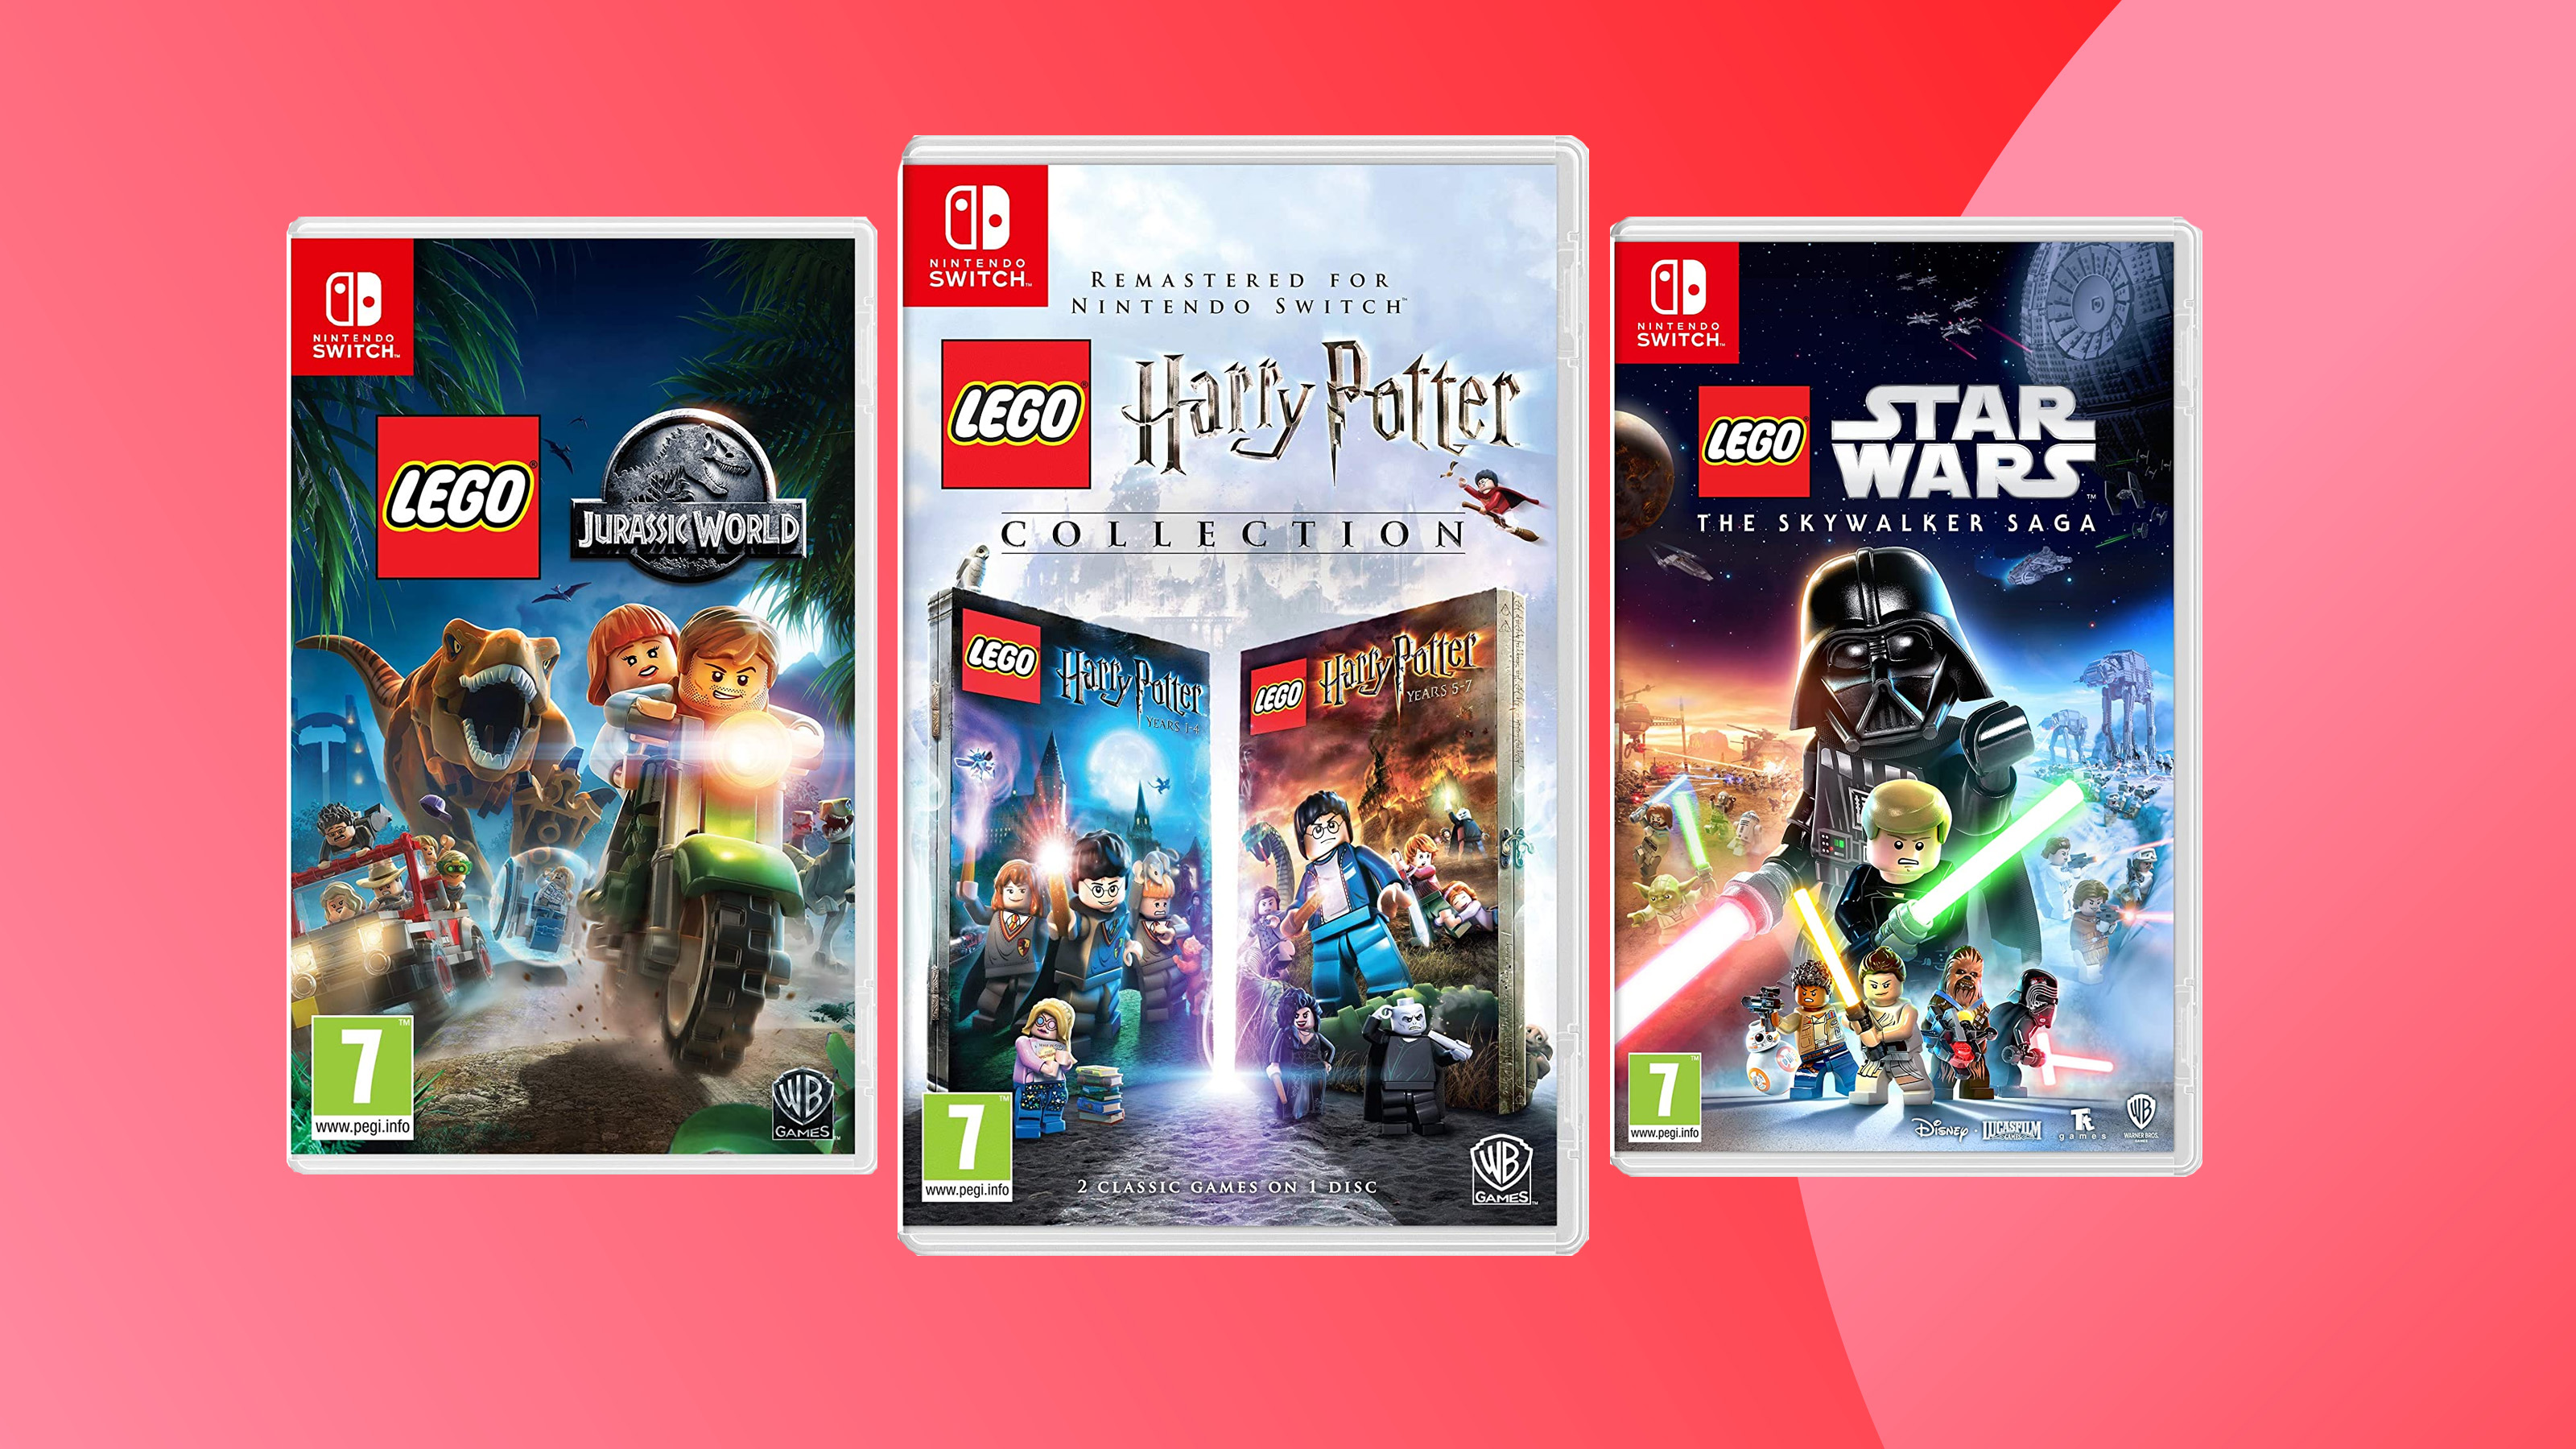 product images of various LEGO Switch games on a colorful background